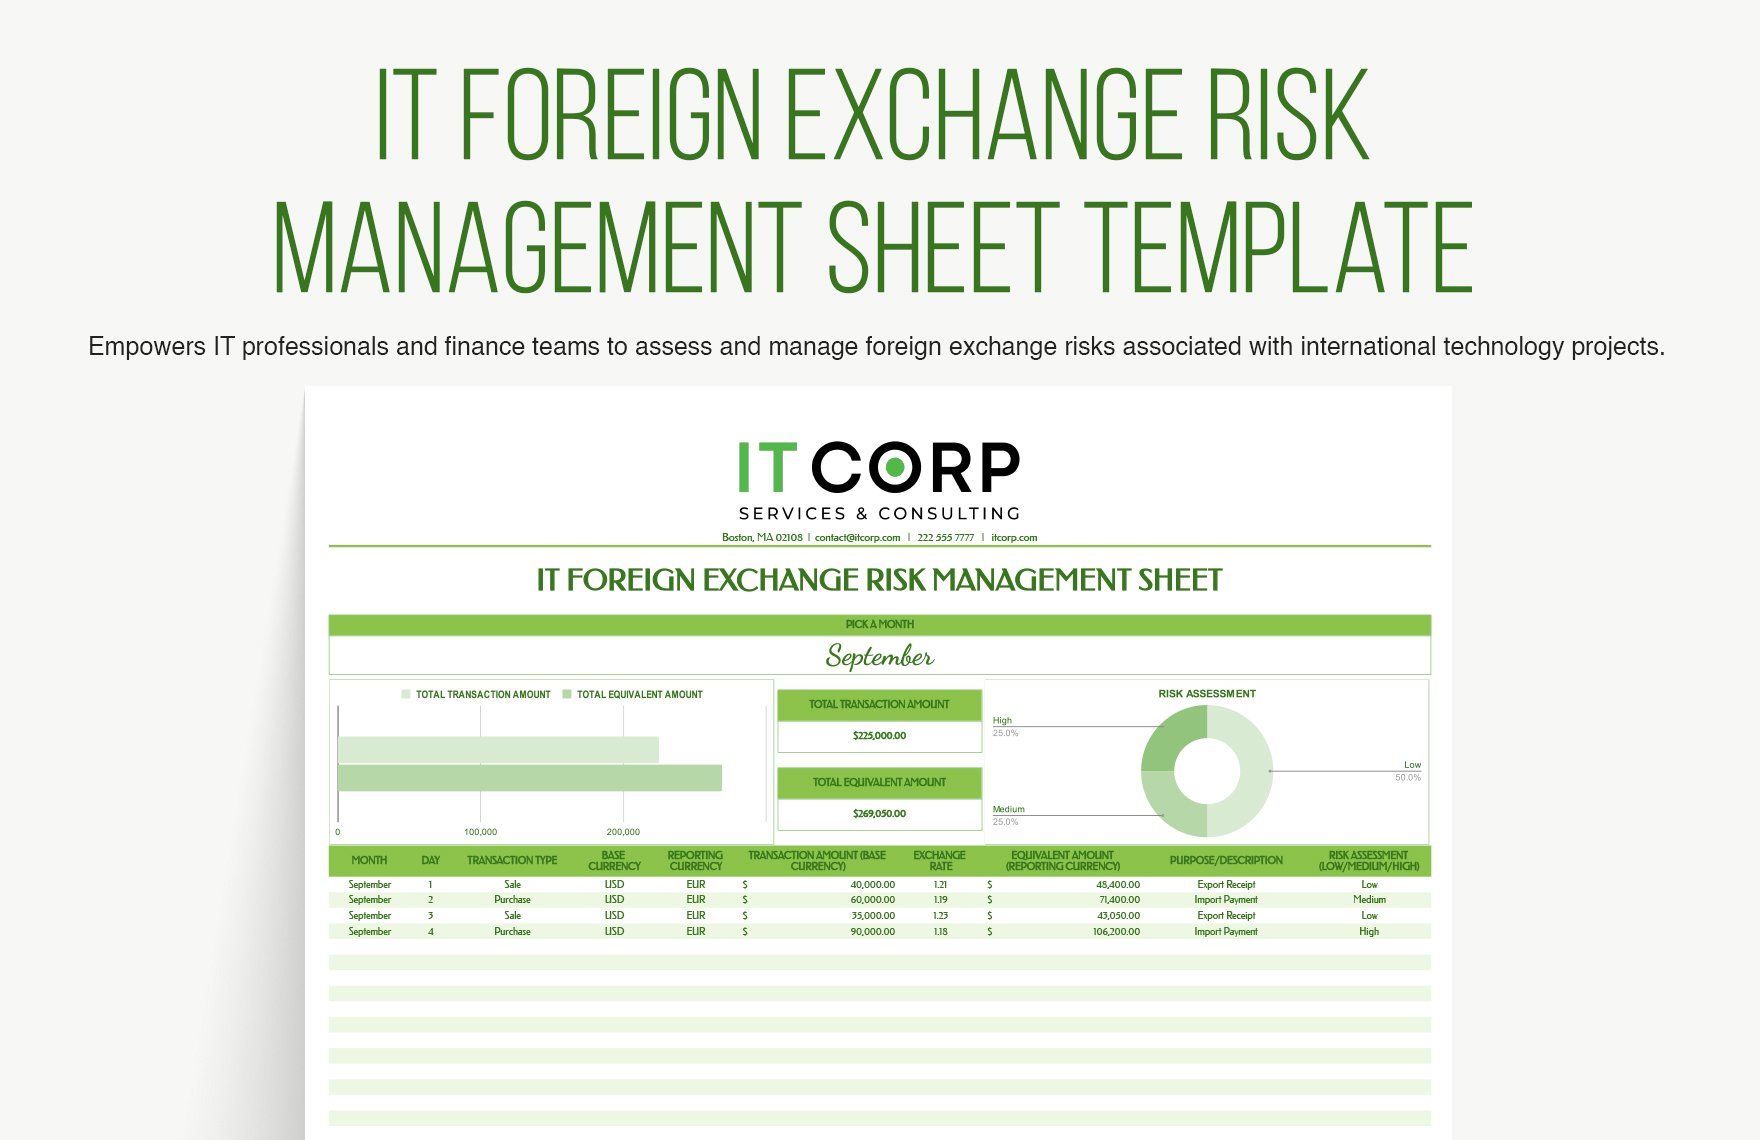 IT Foreign Exchange Risk Management Sheet Template